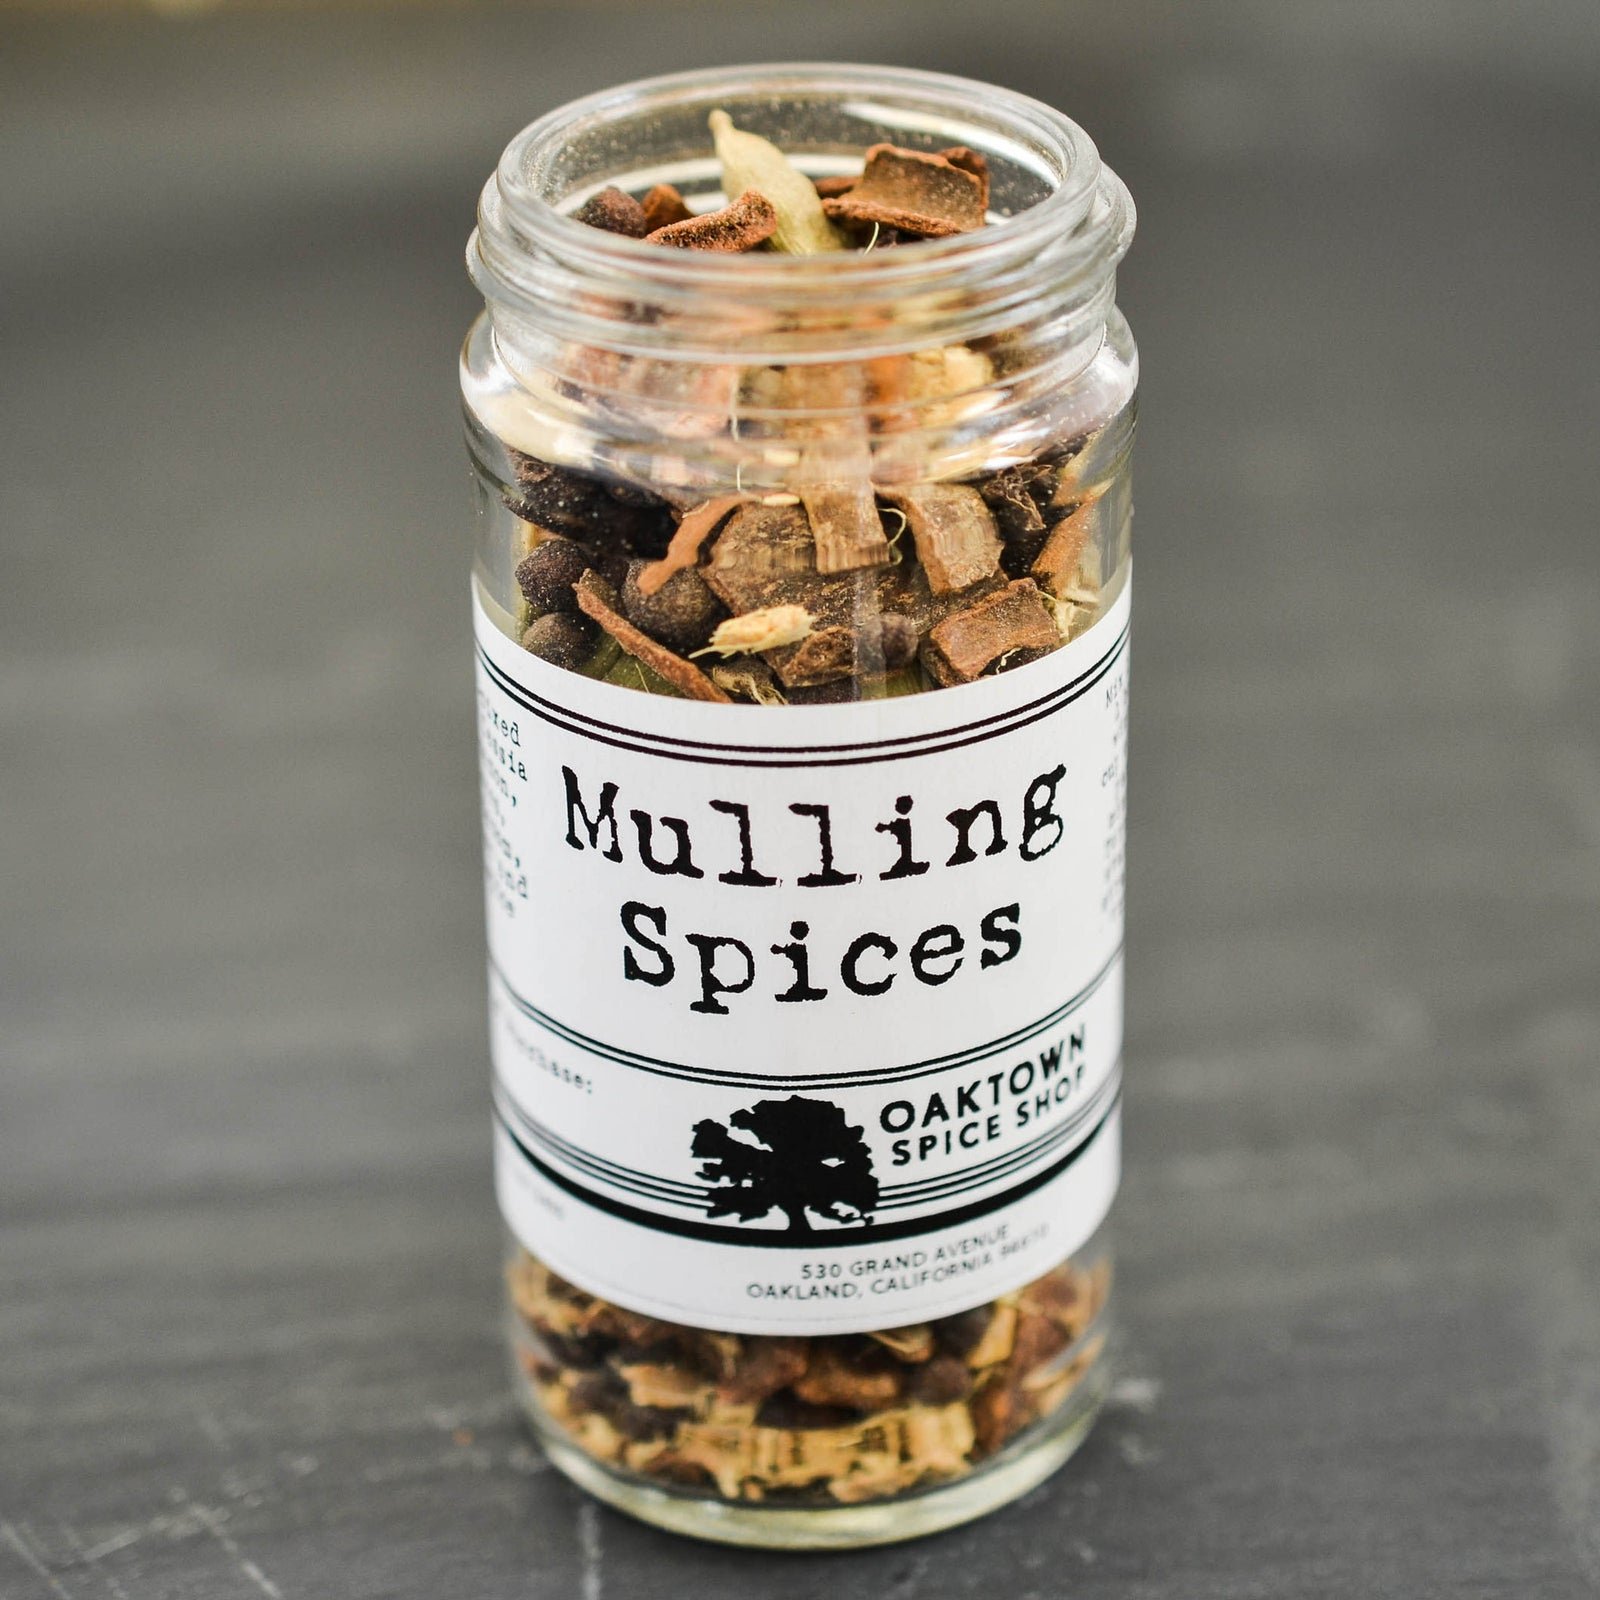 02                                    Mulling Spices - Nothing compliments the crisp autumn air like the aroma of a warm, bubbling pot of mulling spices. Hand-blended in Oakland, Oaktown Spice Shop’s rich mix of allspice, ginger, cardamom, cinnamon and cloves will keep you warm inside and out. SHOP NOW >